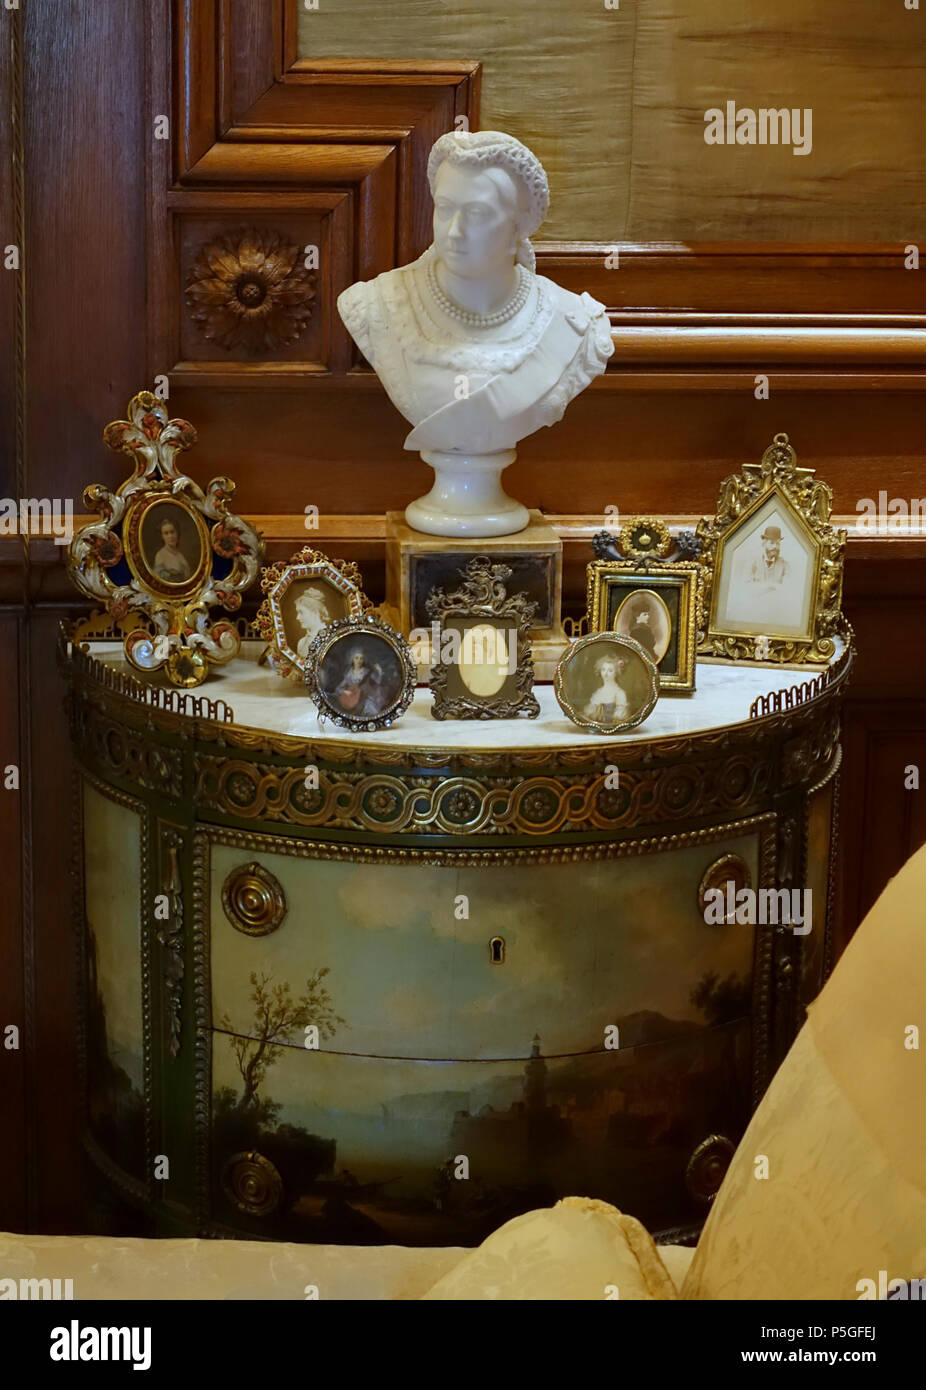 337 Chest of drawers, attributed to René Dubois, France, 1770-1775, with bust of Queen Victoria by Joseph Edgar Boehm, c. 1870 - Waddesdon Manor - Buckinghamshire, England - DSC07665 Stock Photo